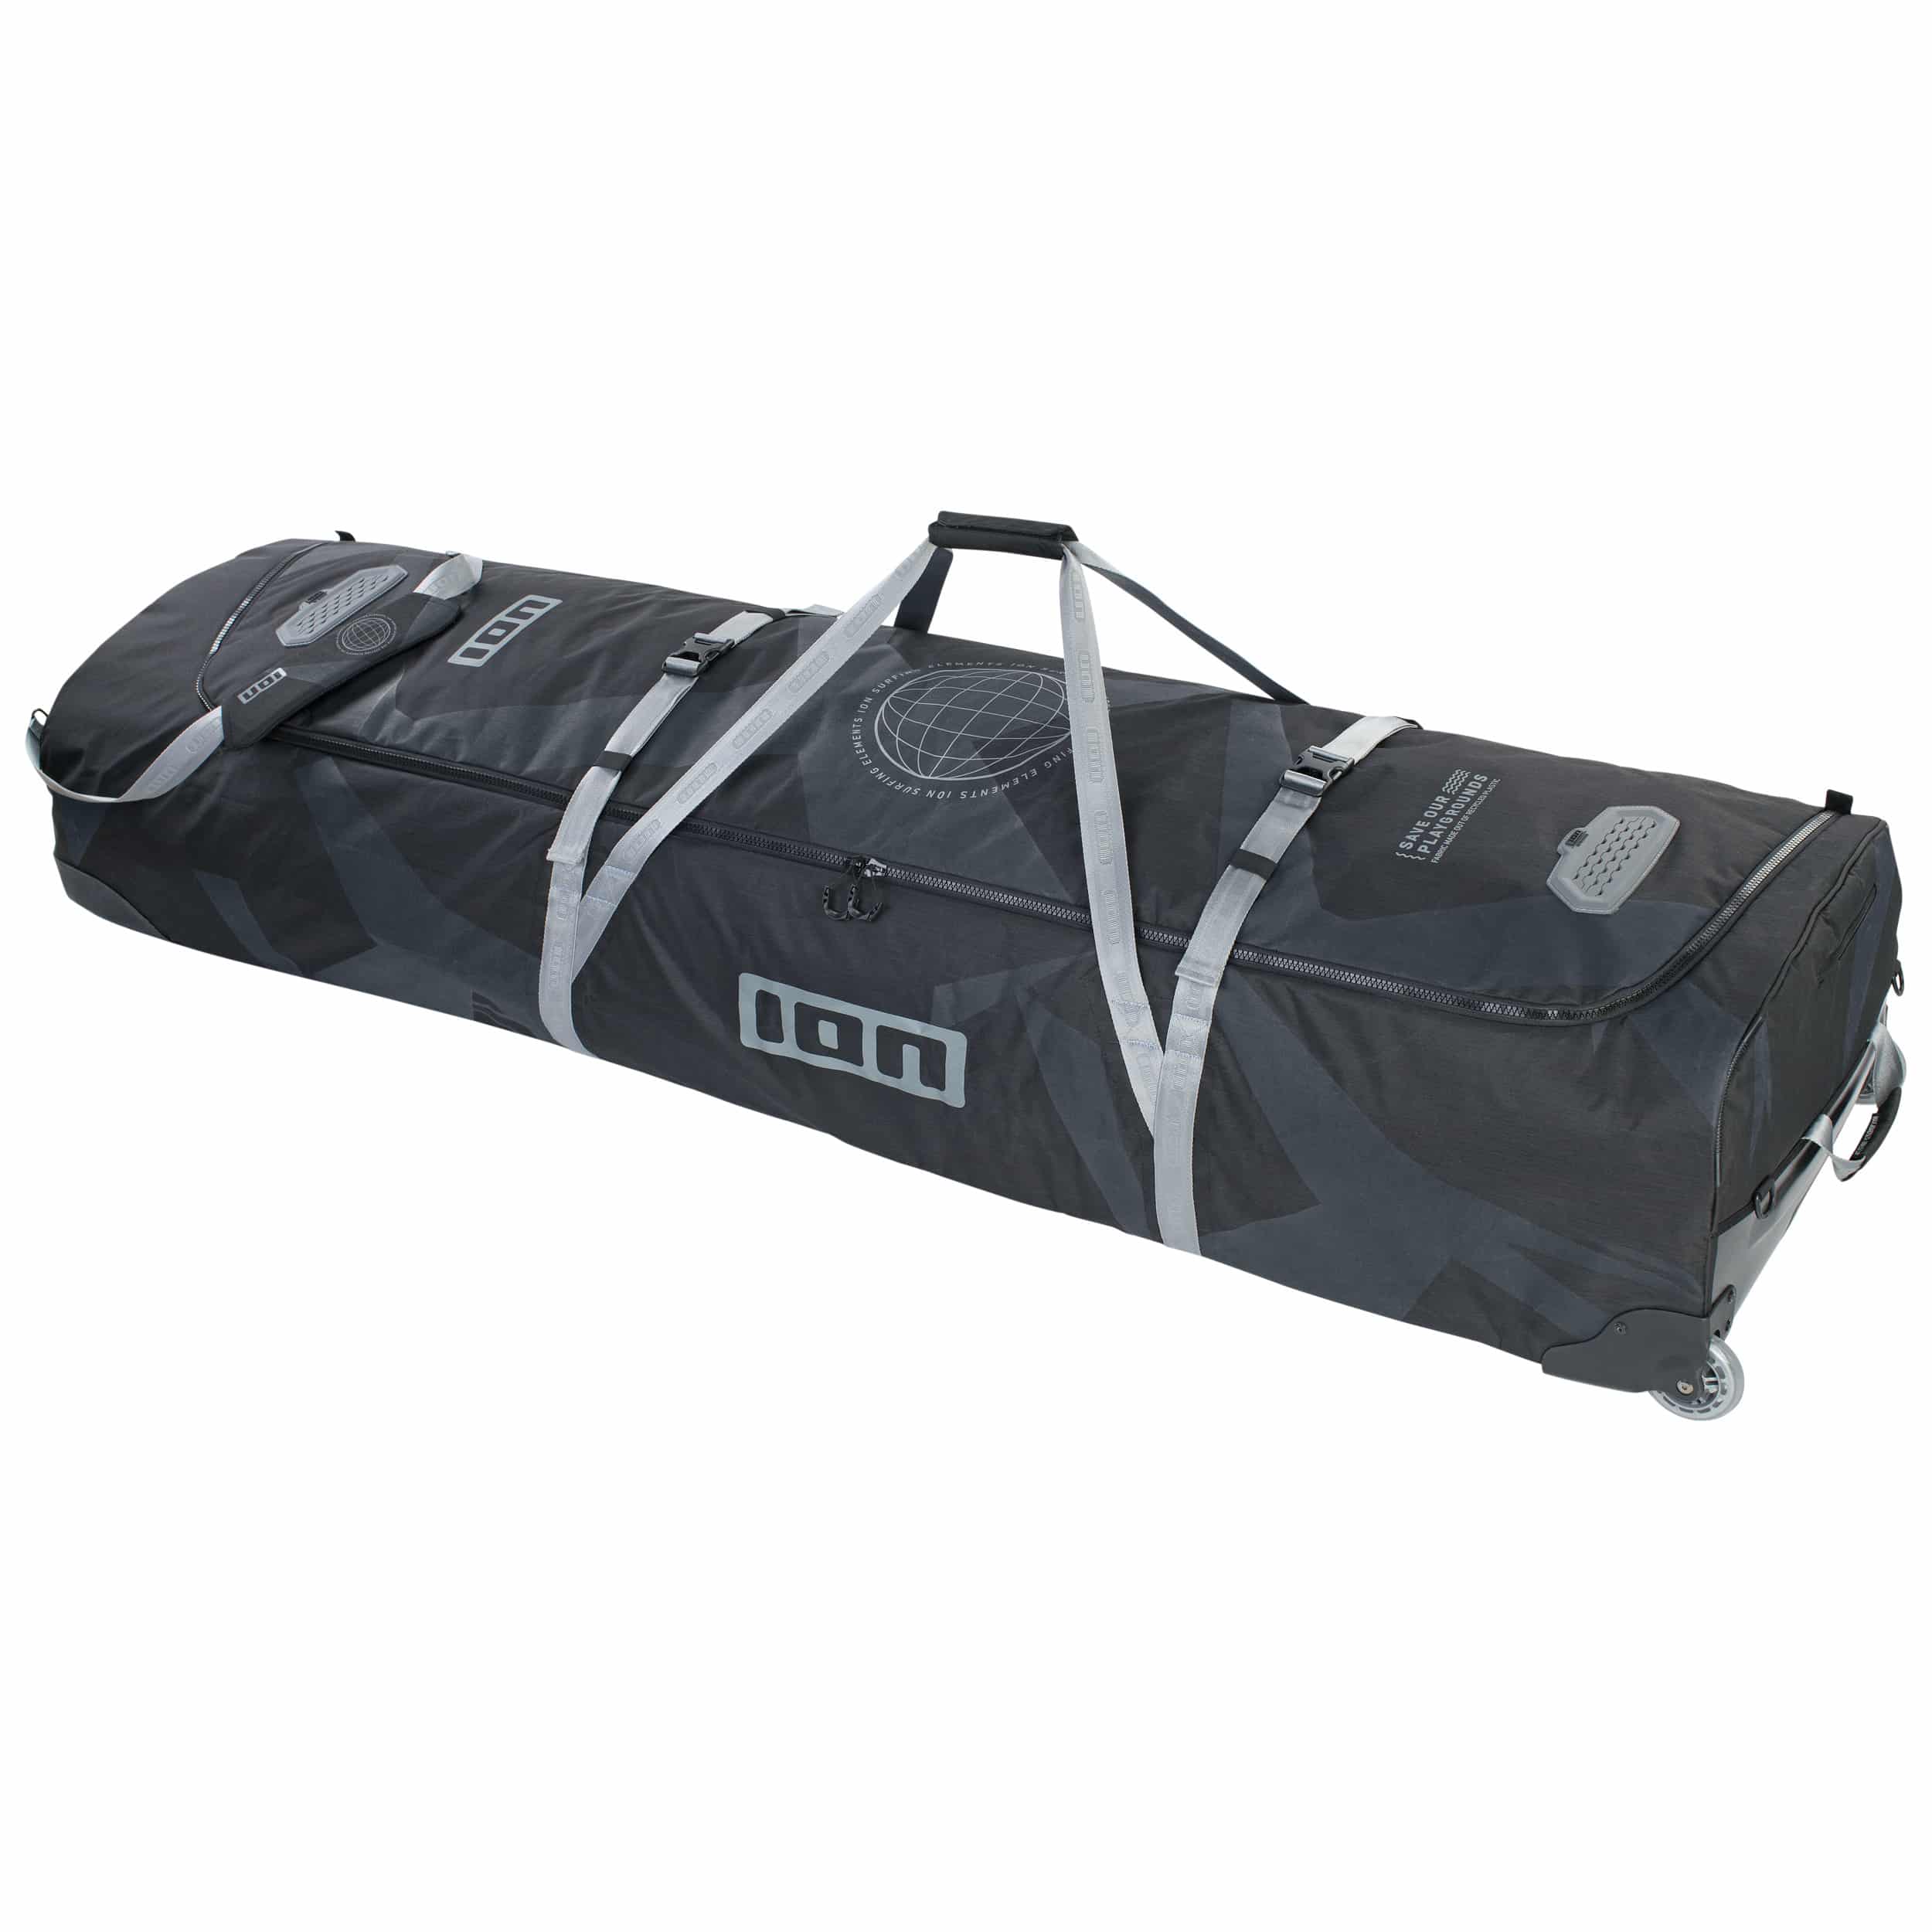 ION Gearbag Tec 2021